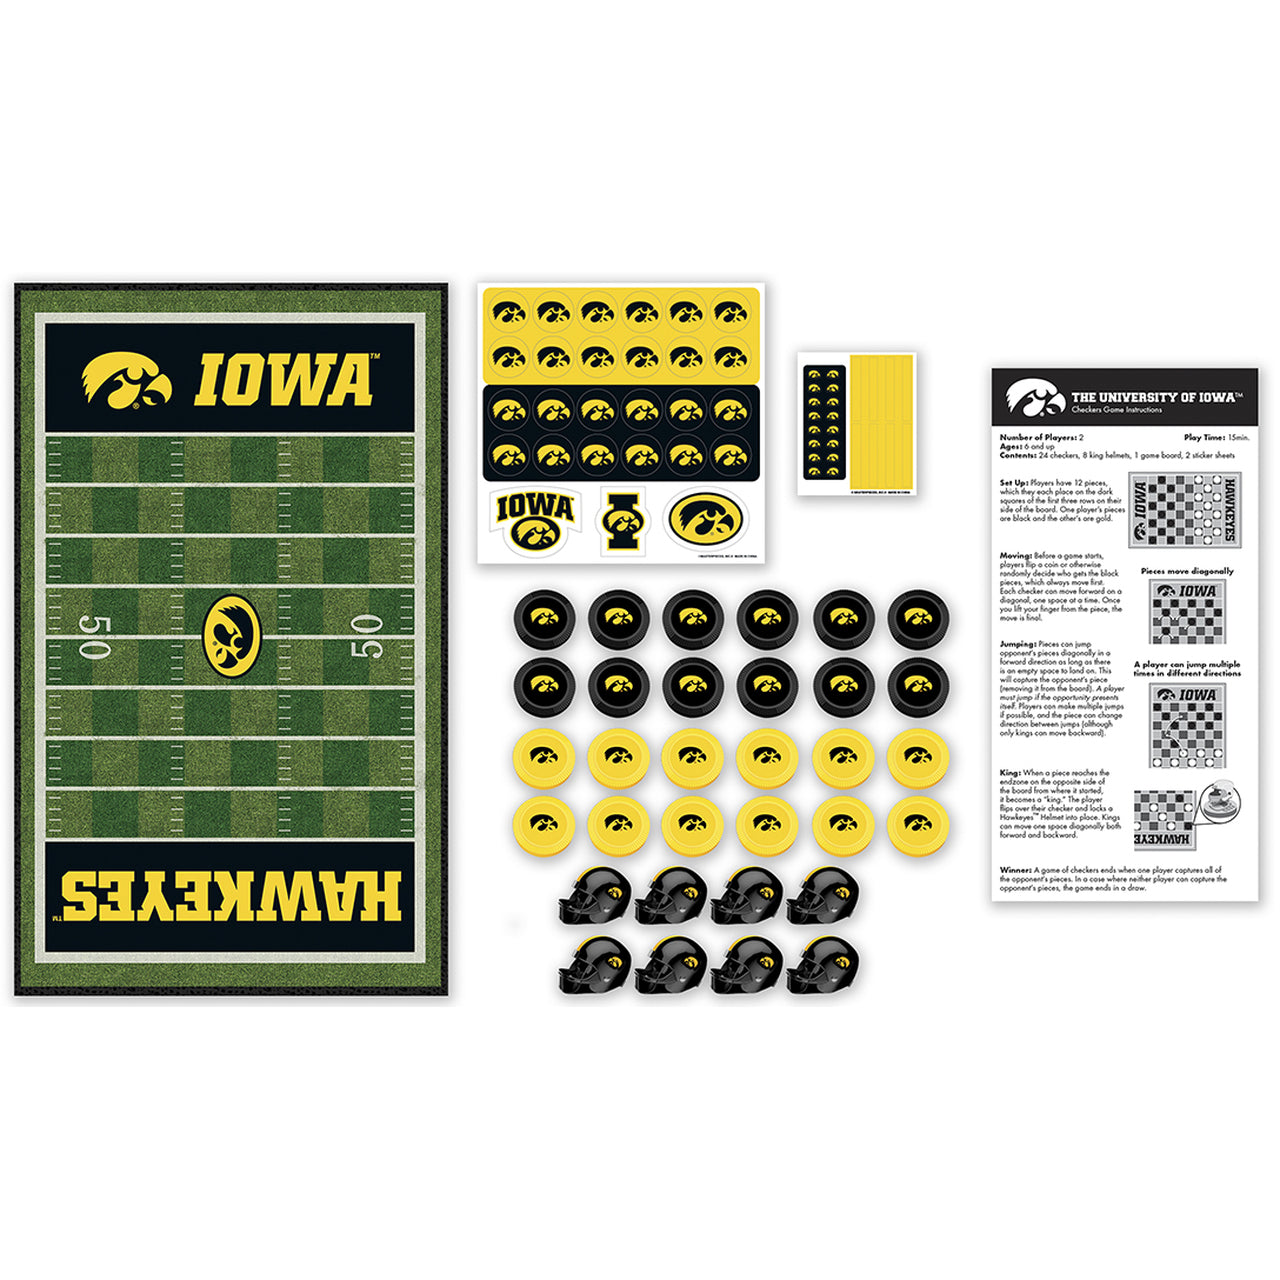 Iowa Hawkeyes Checkers Board Game by Masterpieces